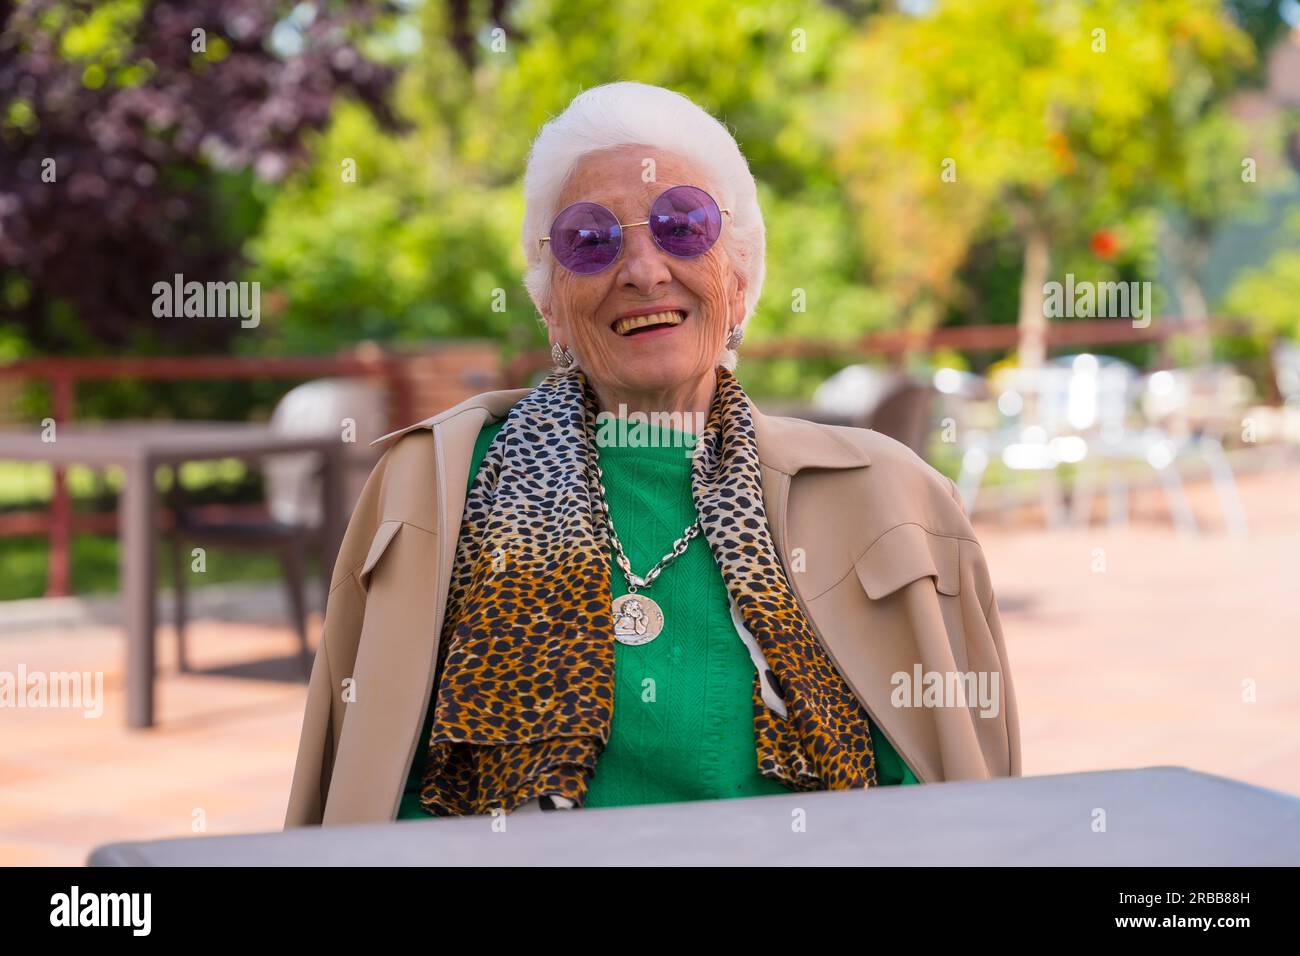 An elderly woman smiling in the garden of a nursing home or retirement home at a summer party wearing sunglasses Stock Photo